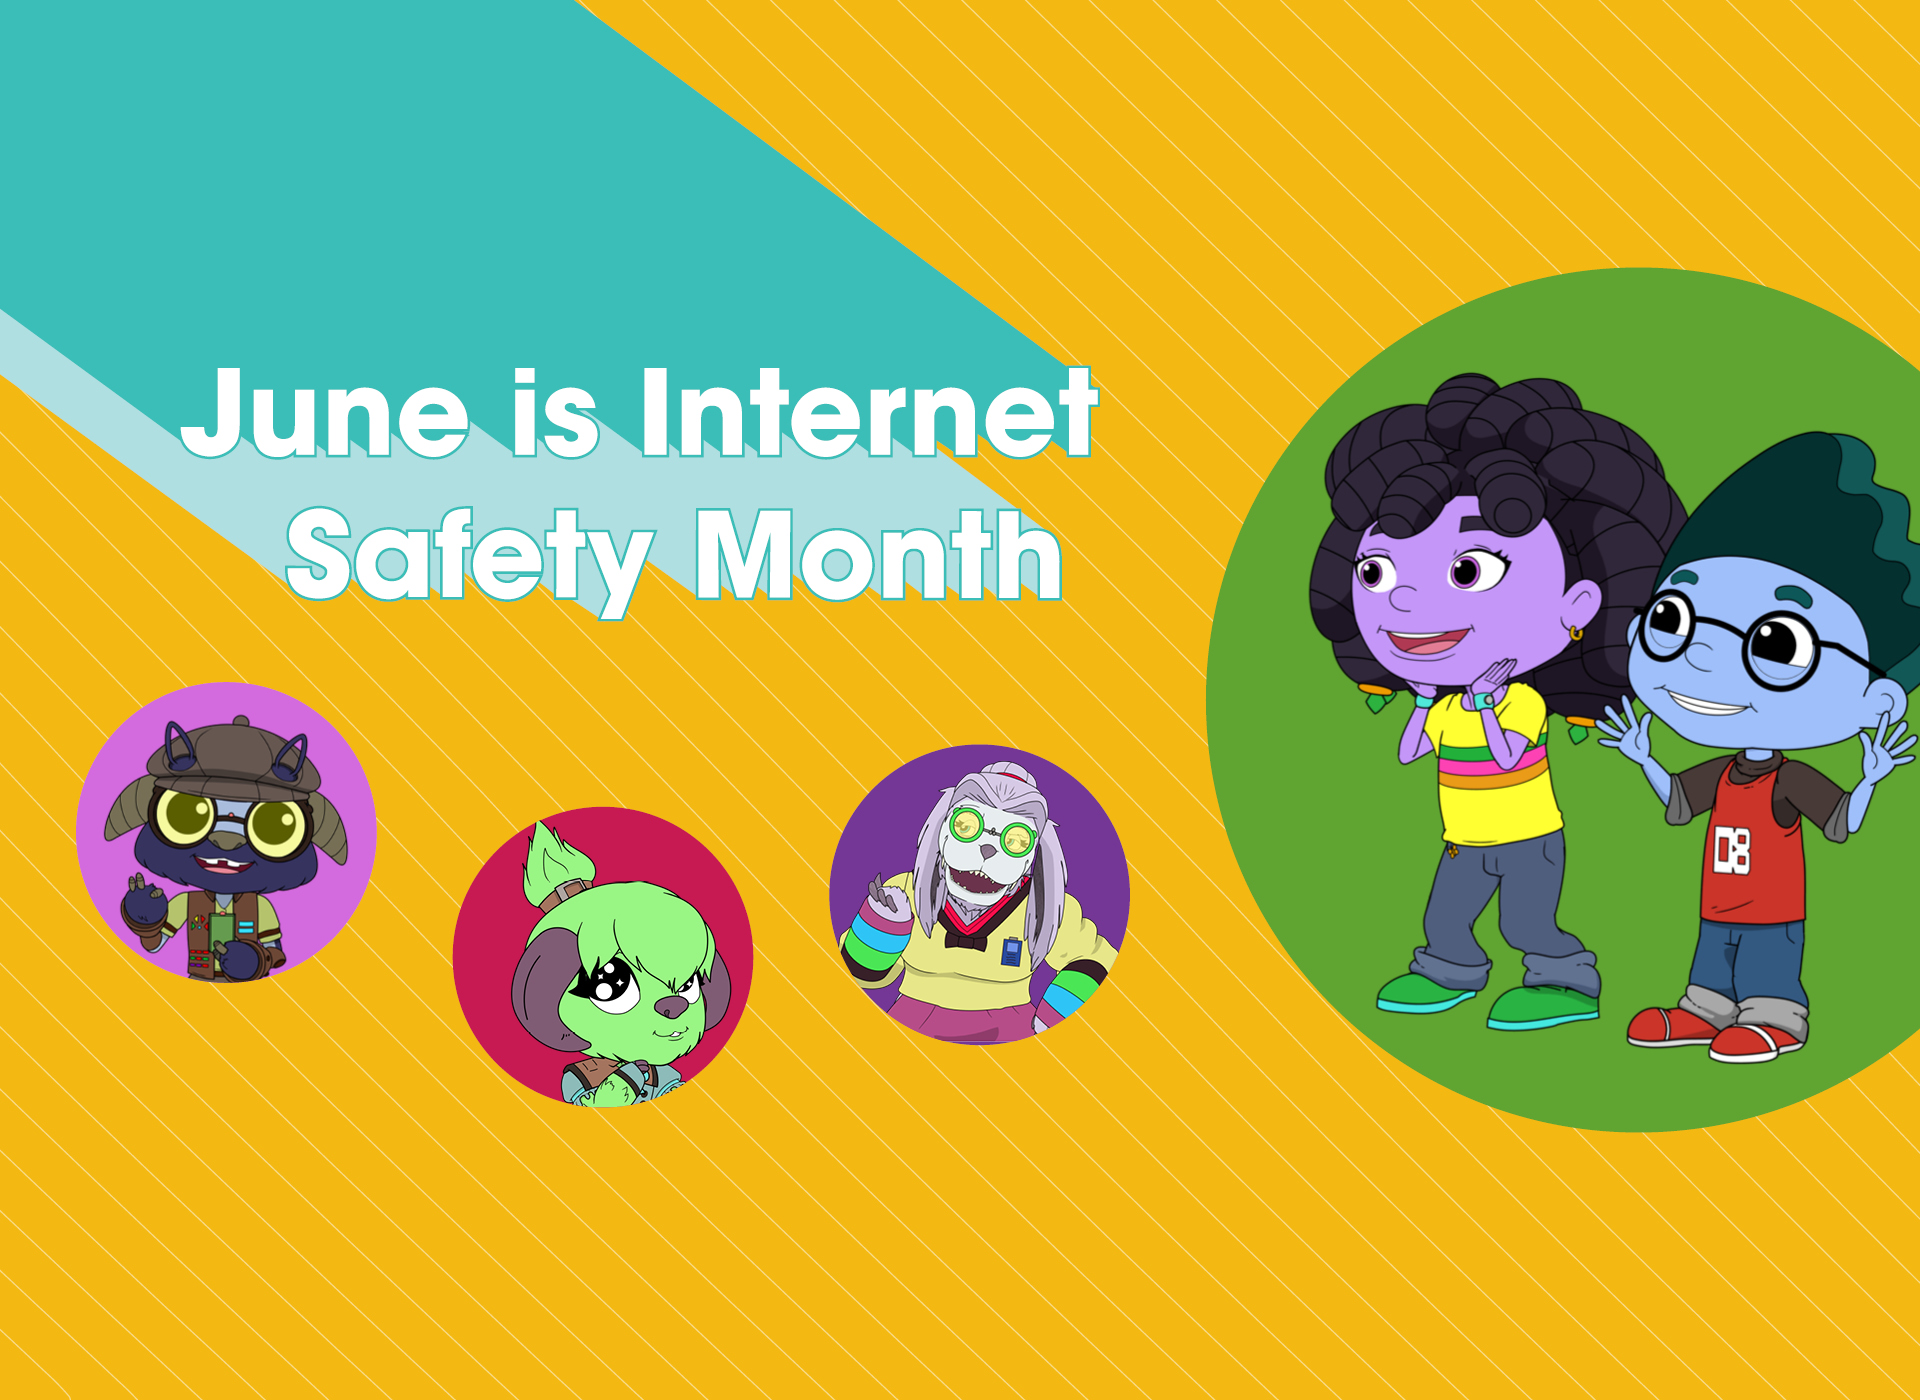 June is Internet Safety Month